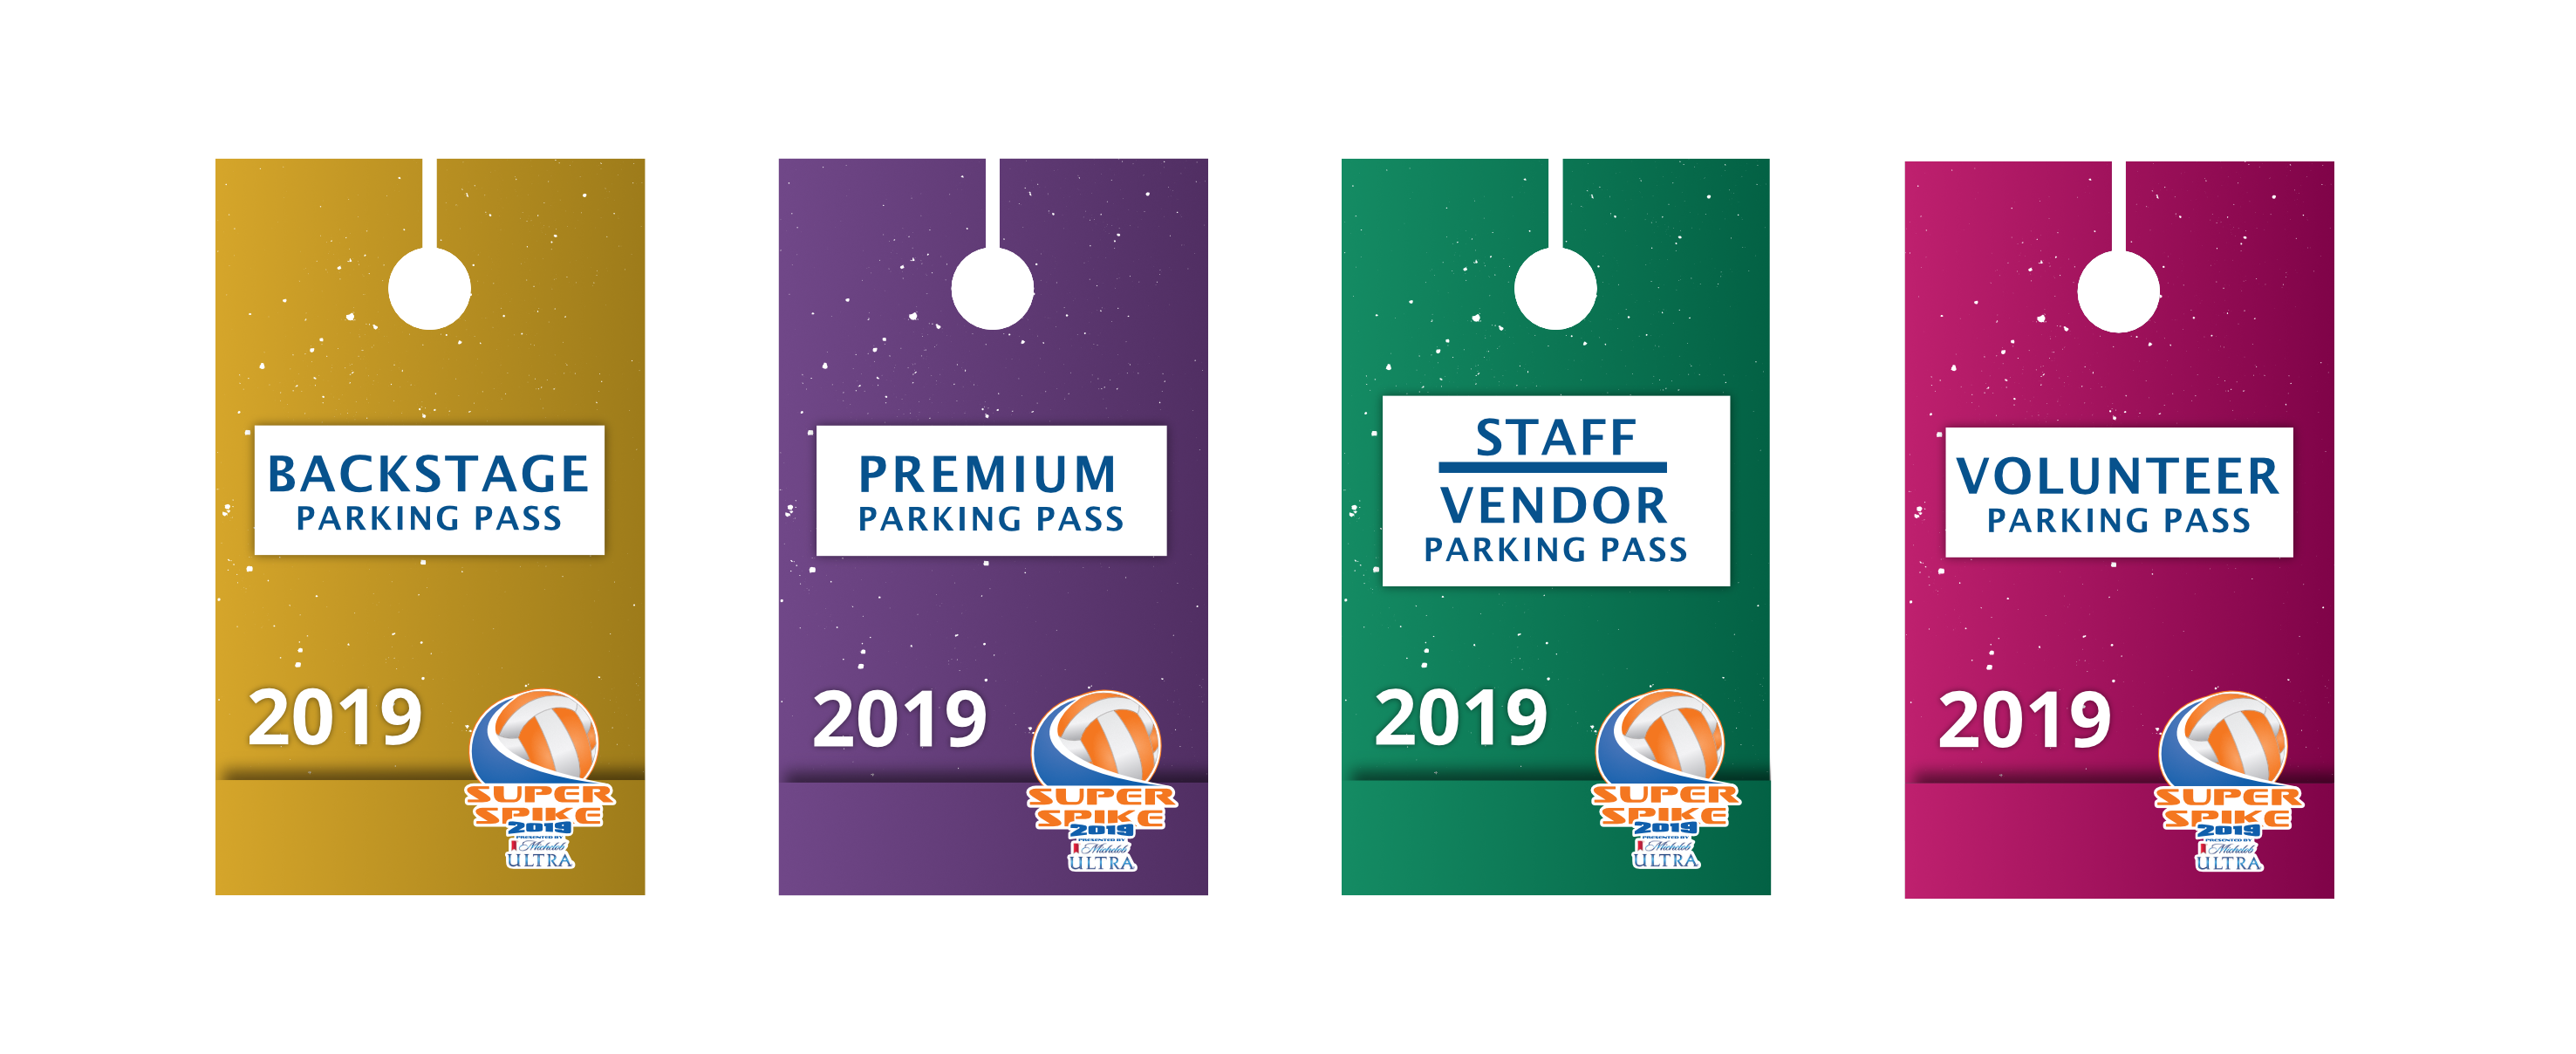 Parking passes shown in four different colours to identify Backstage, Premium, Staff/Vendor, or Volunteer parking access.